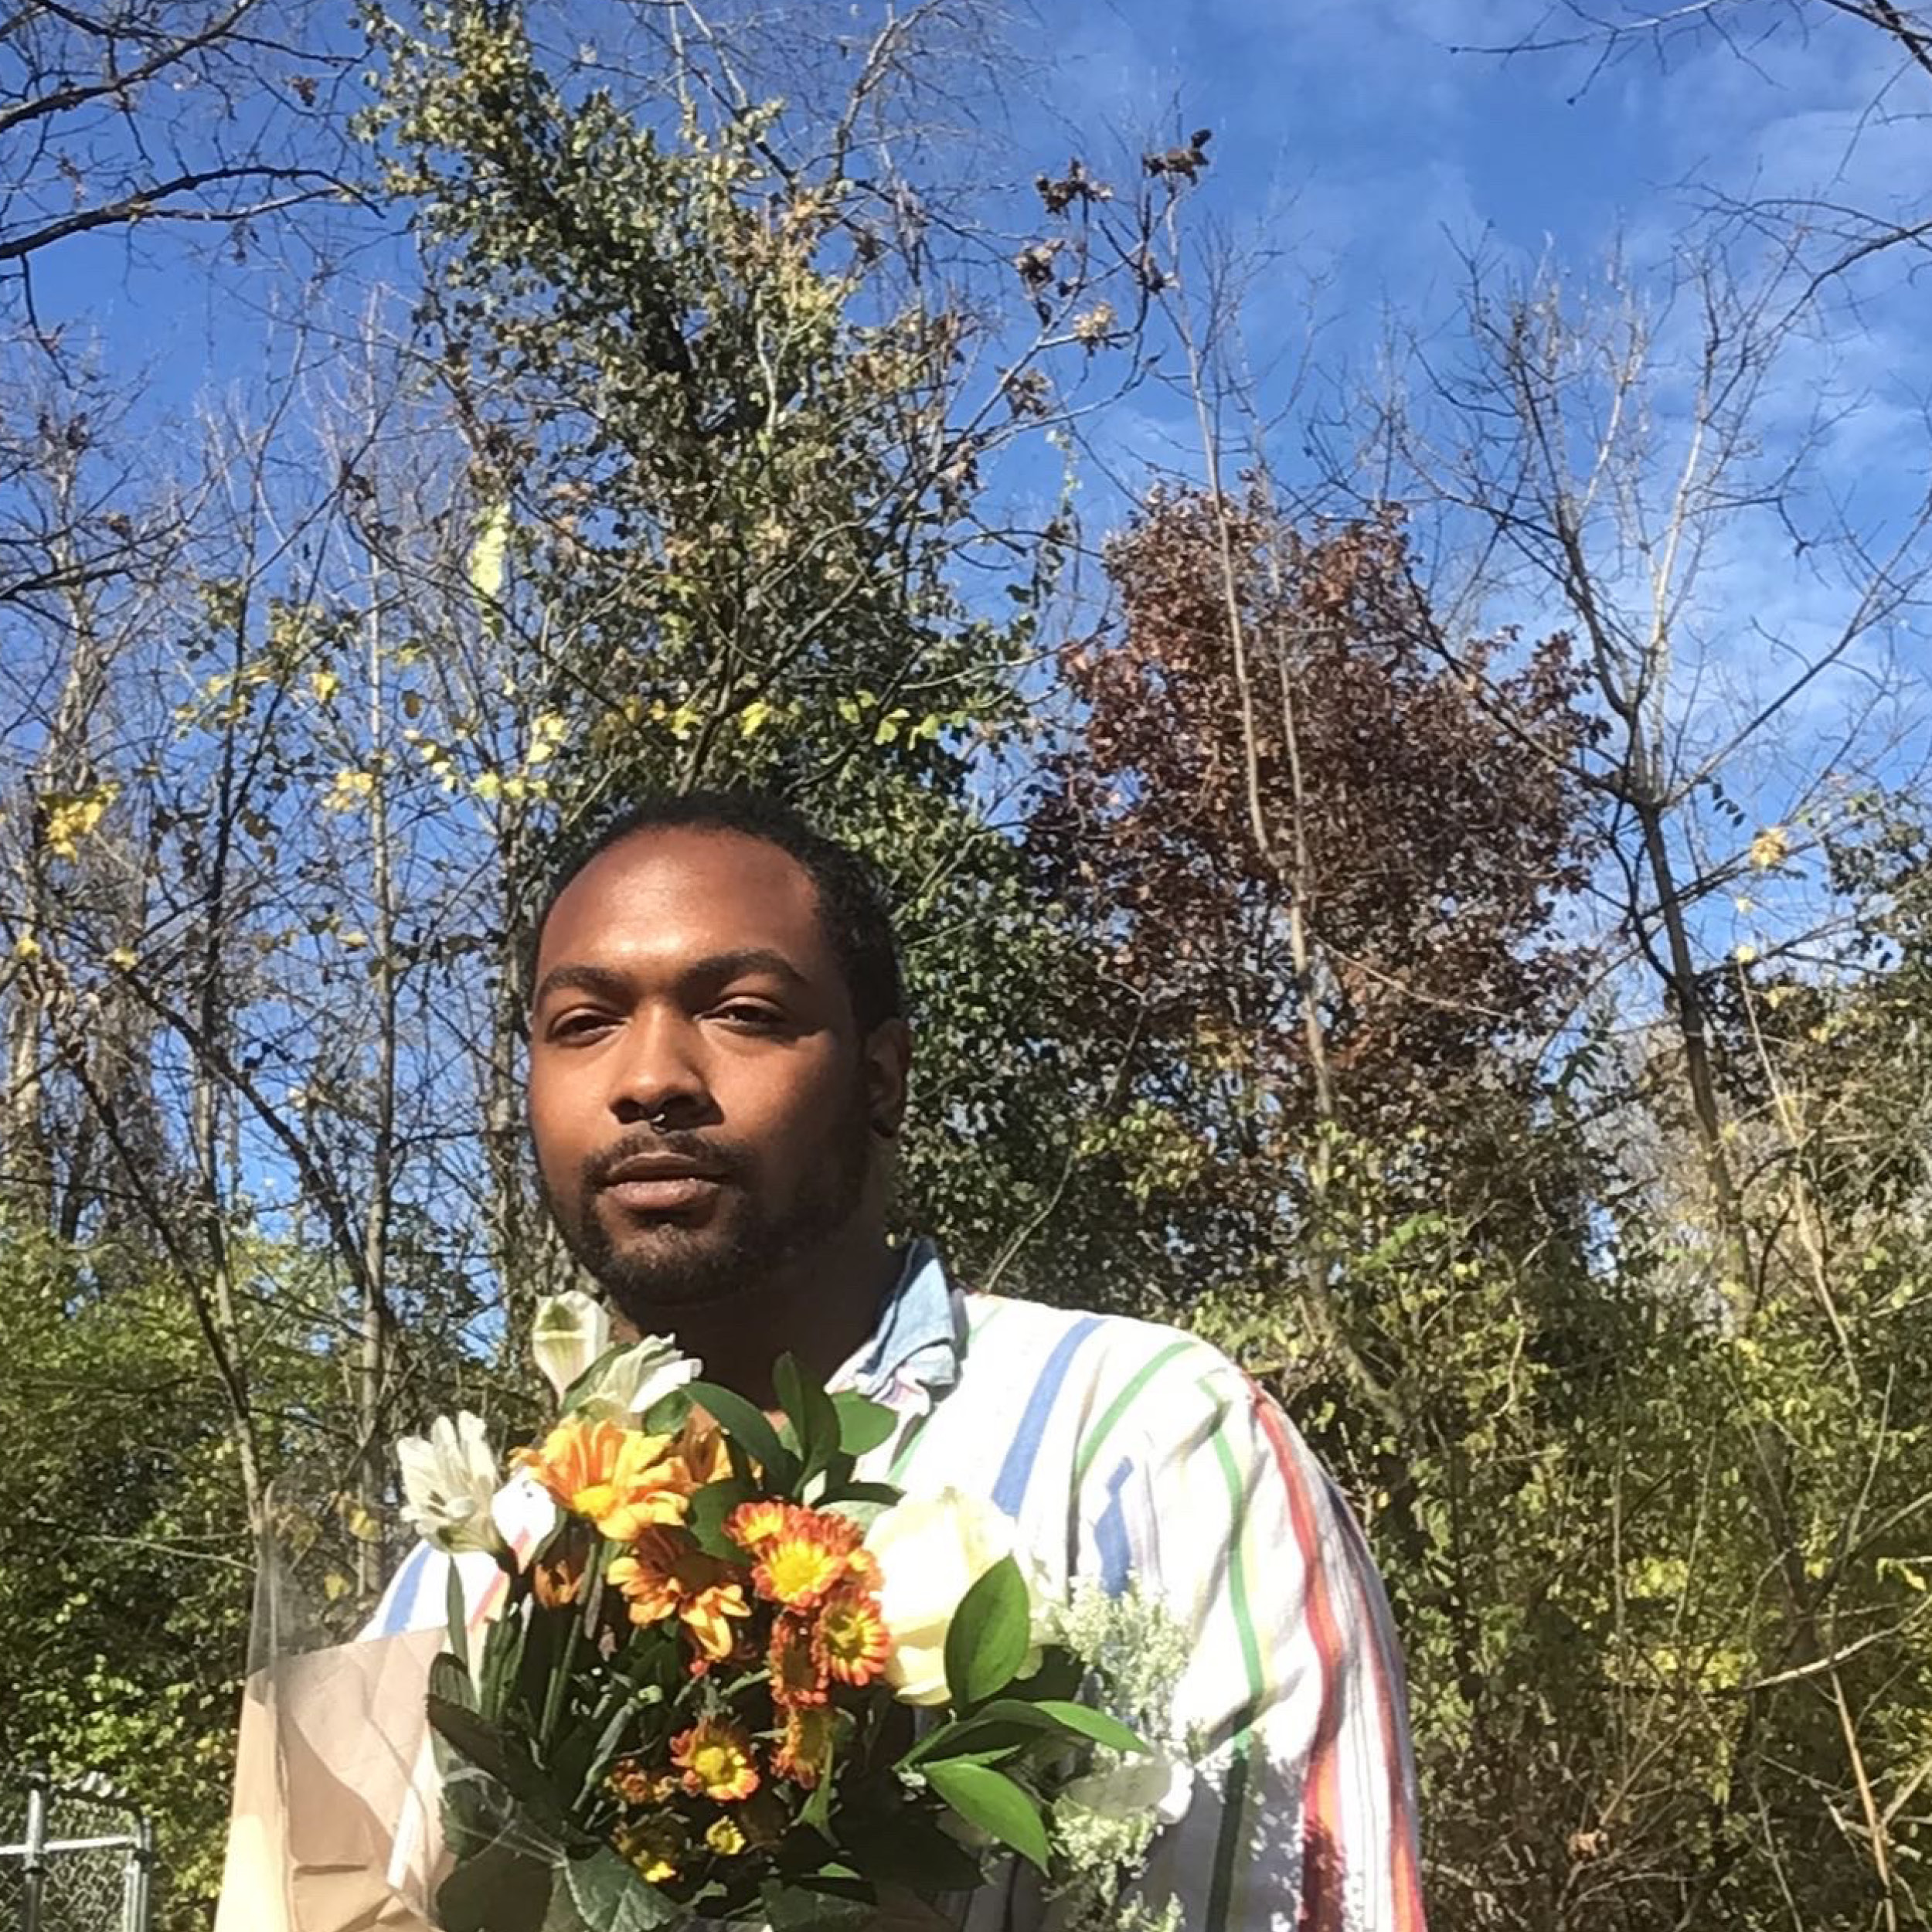 Man outside with flowers